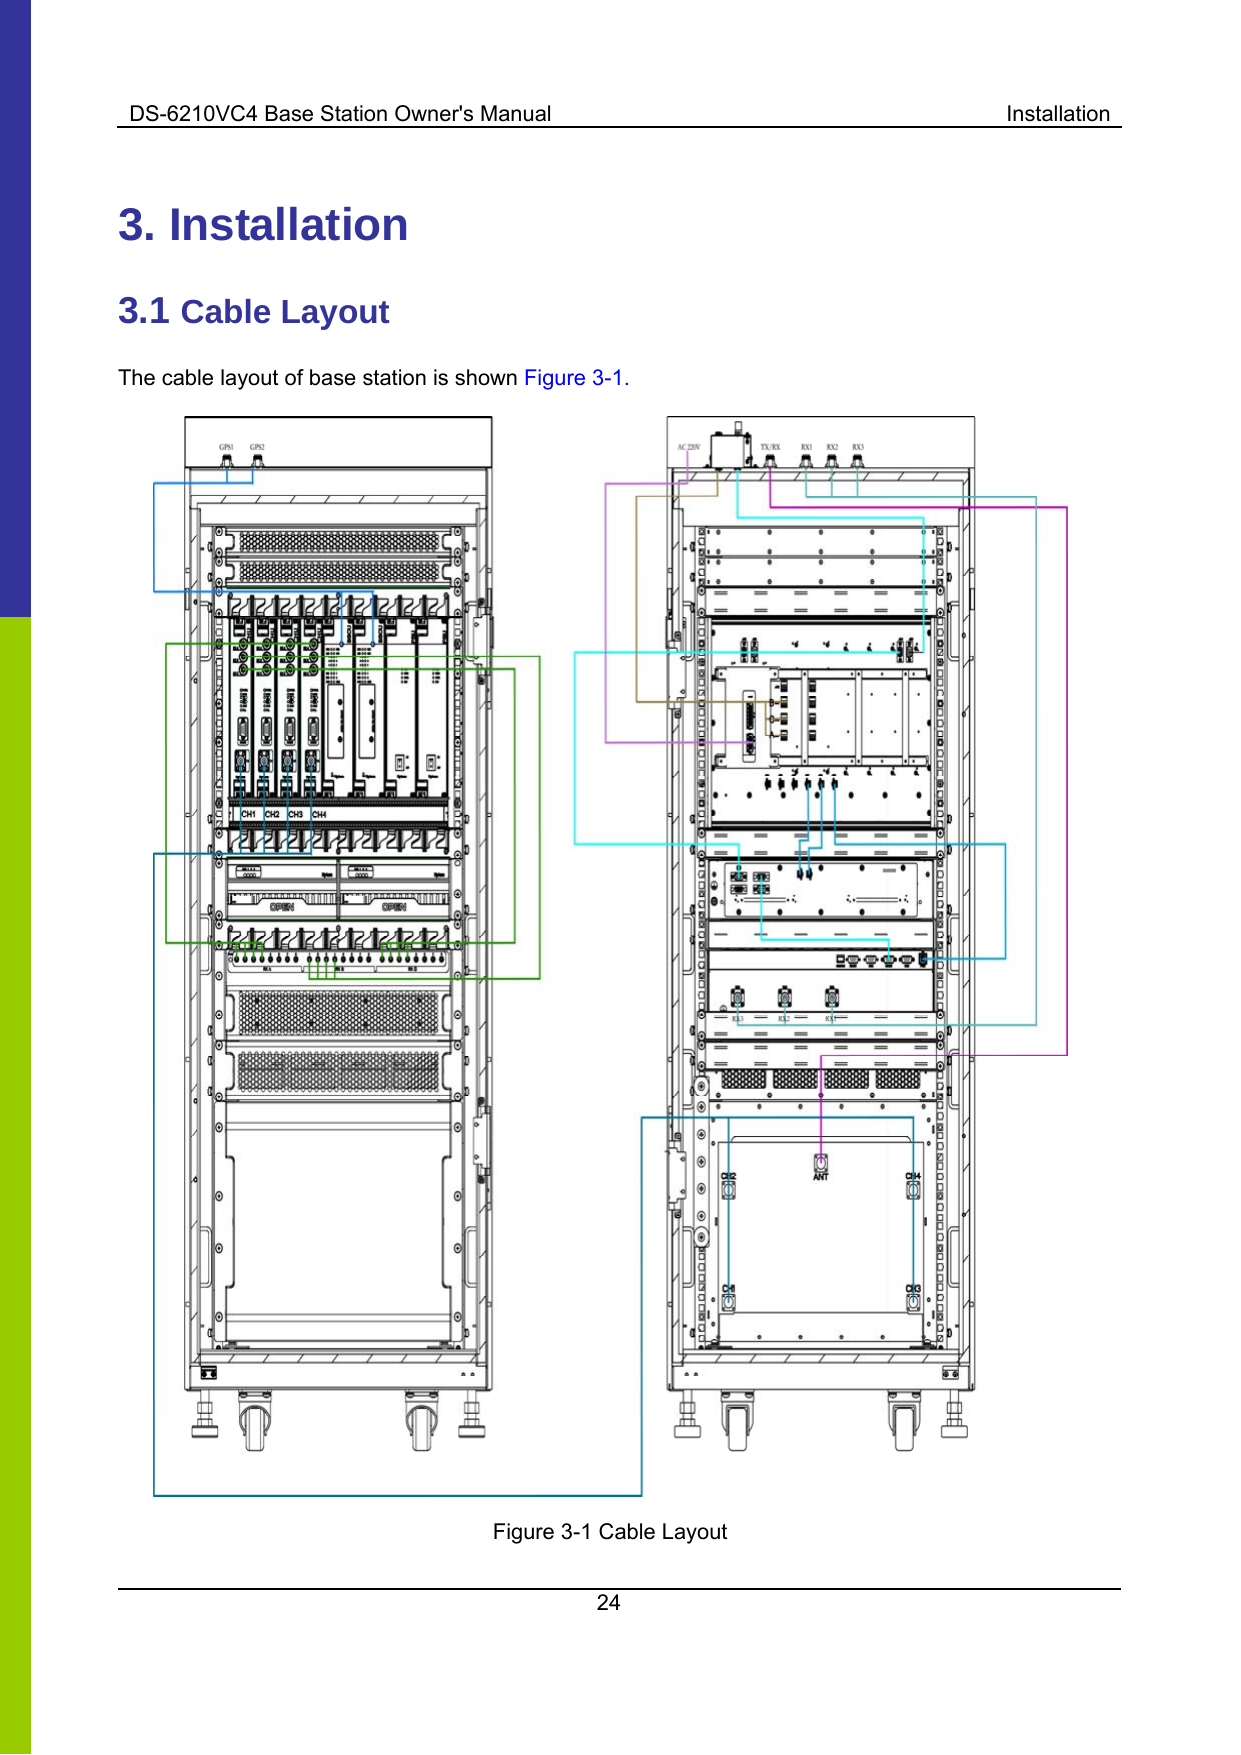 DS-6210VC4 Base Station Owner&apos;s Manual  Installation 24  3. Installation   3.1 Cable Layout   The cable layout of base station is shown Figure 3-1.  Figure 3-1 Cable Layout 